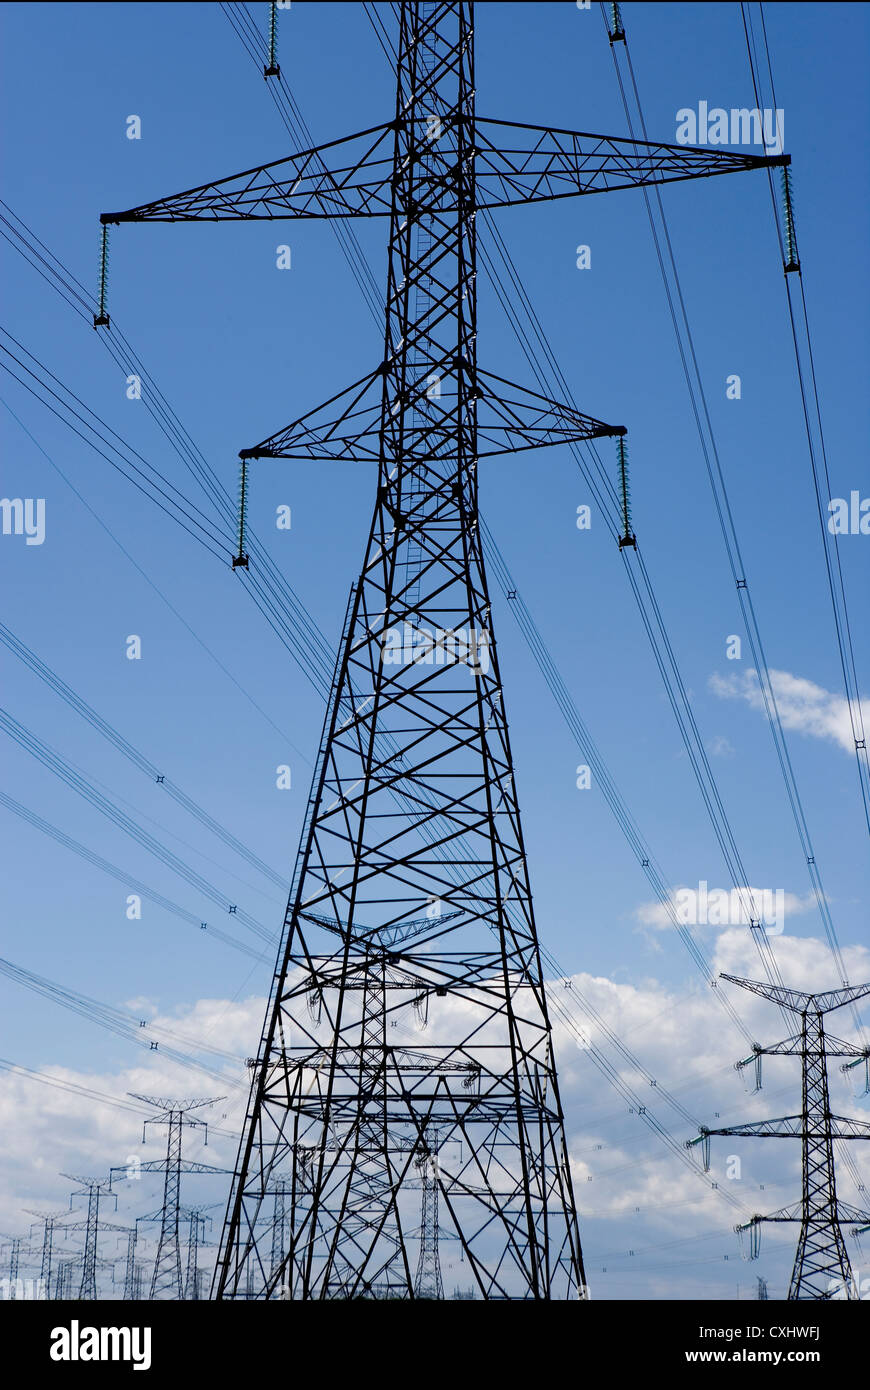 Dramatic view of giant hydro towers against blue sky Stock Photo